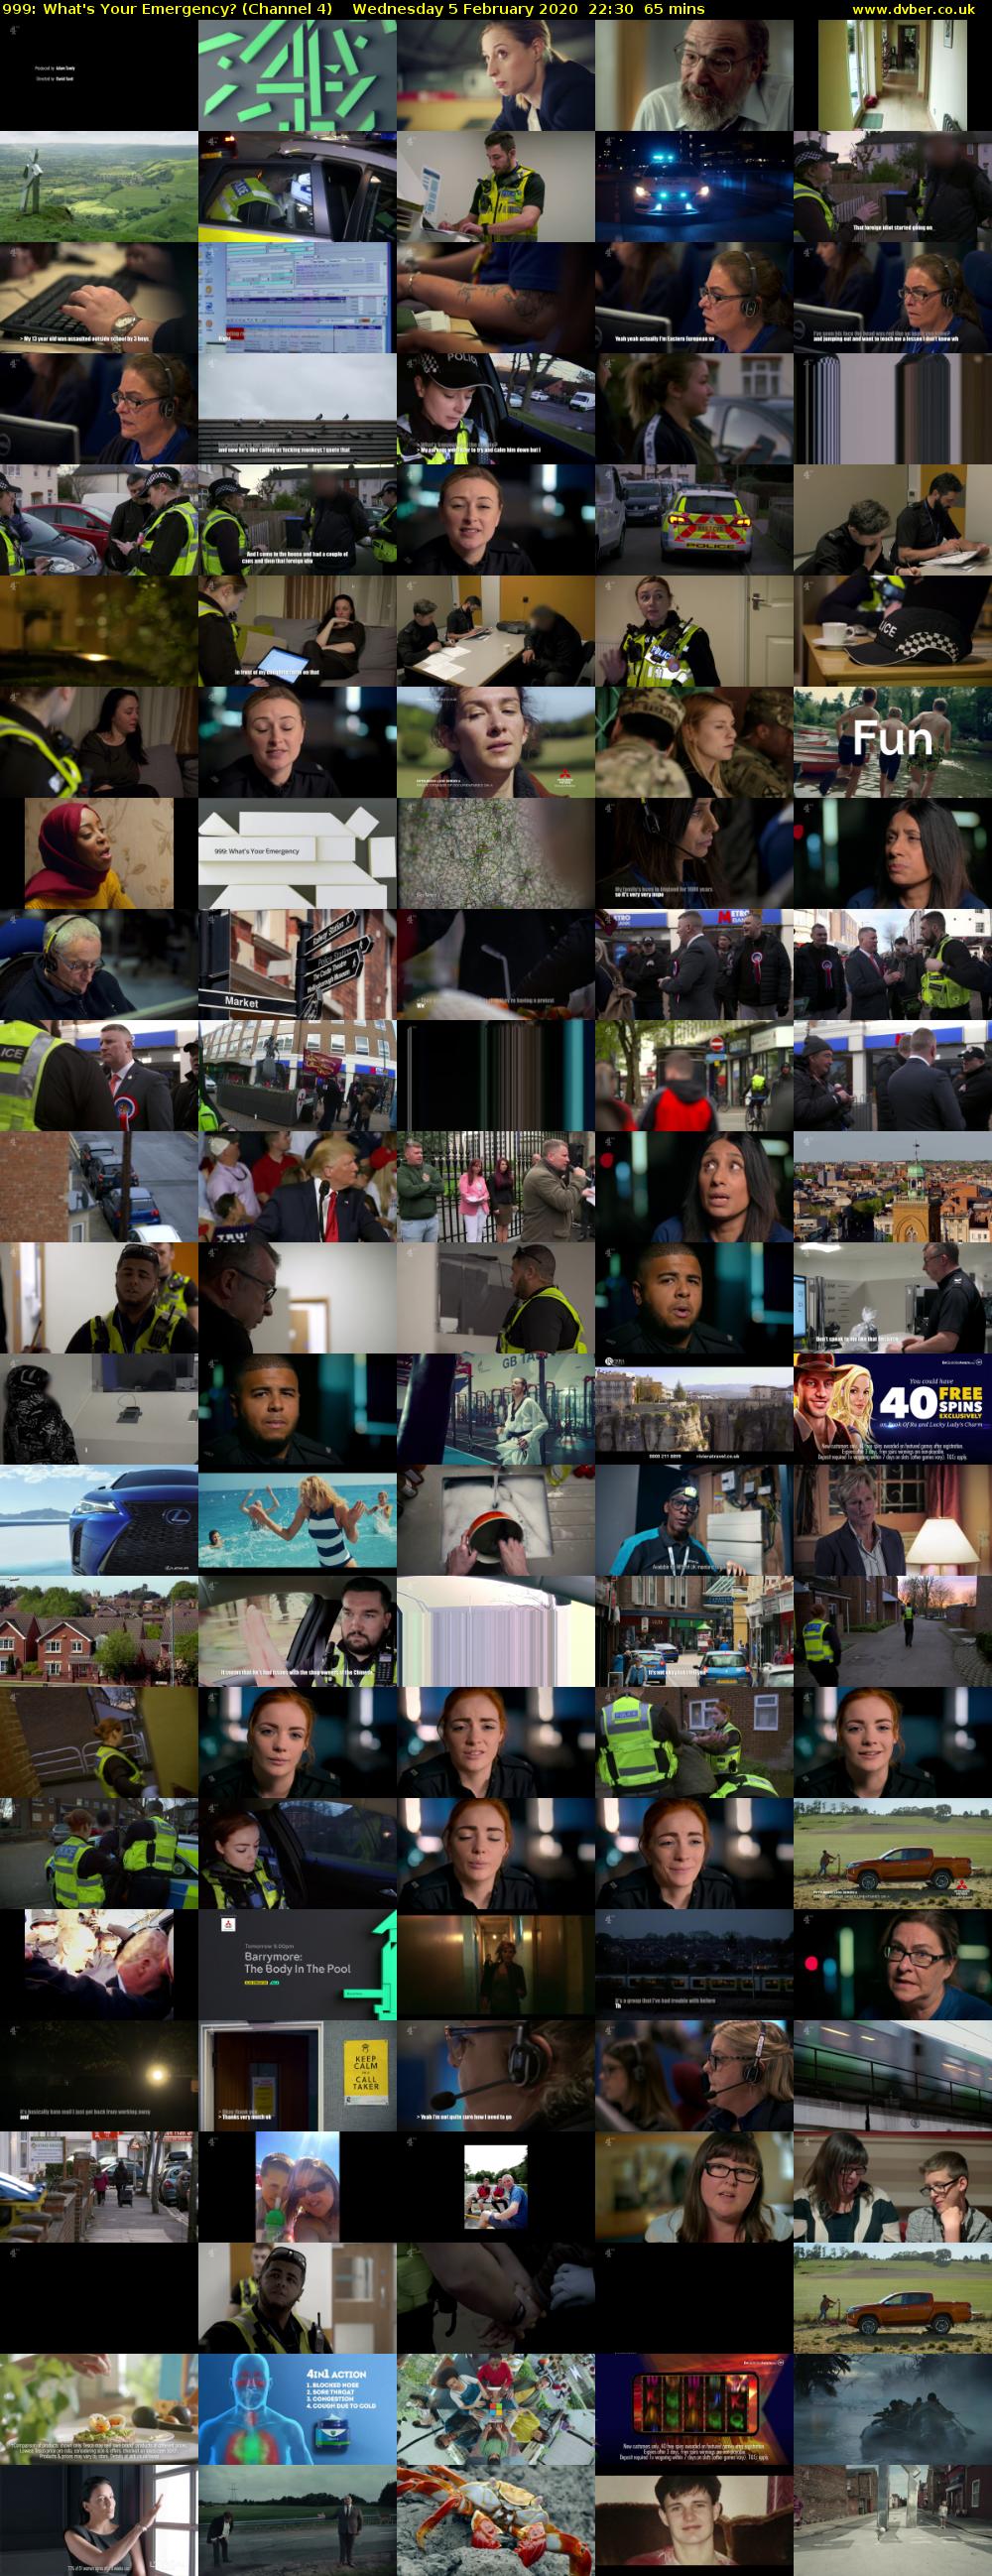 999: What's Your Emergency? (Channel 4) Wednesday 5 February 2020 22:30 - 23:35